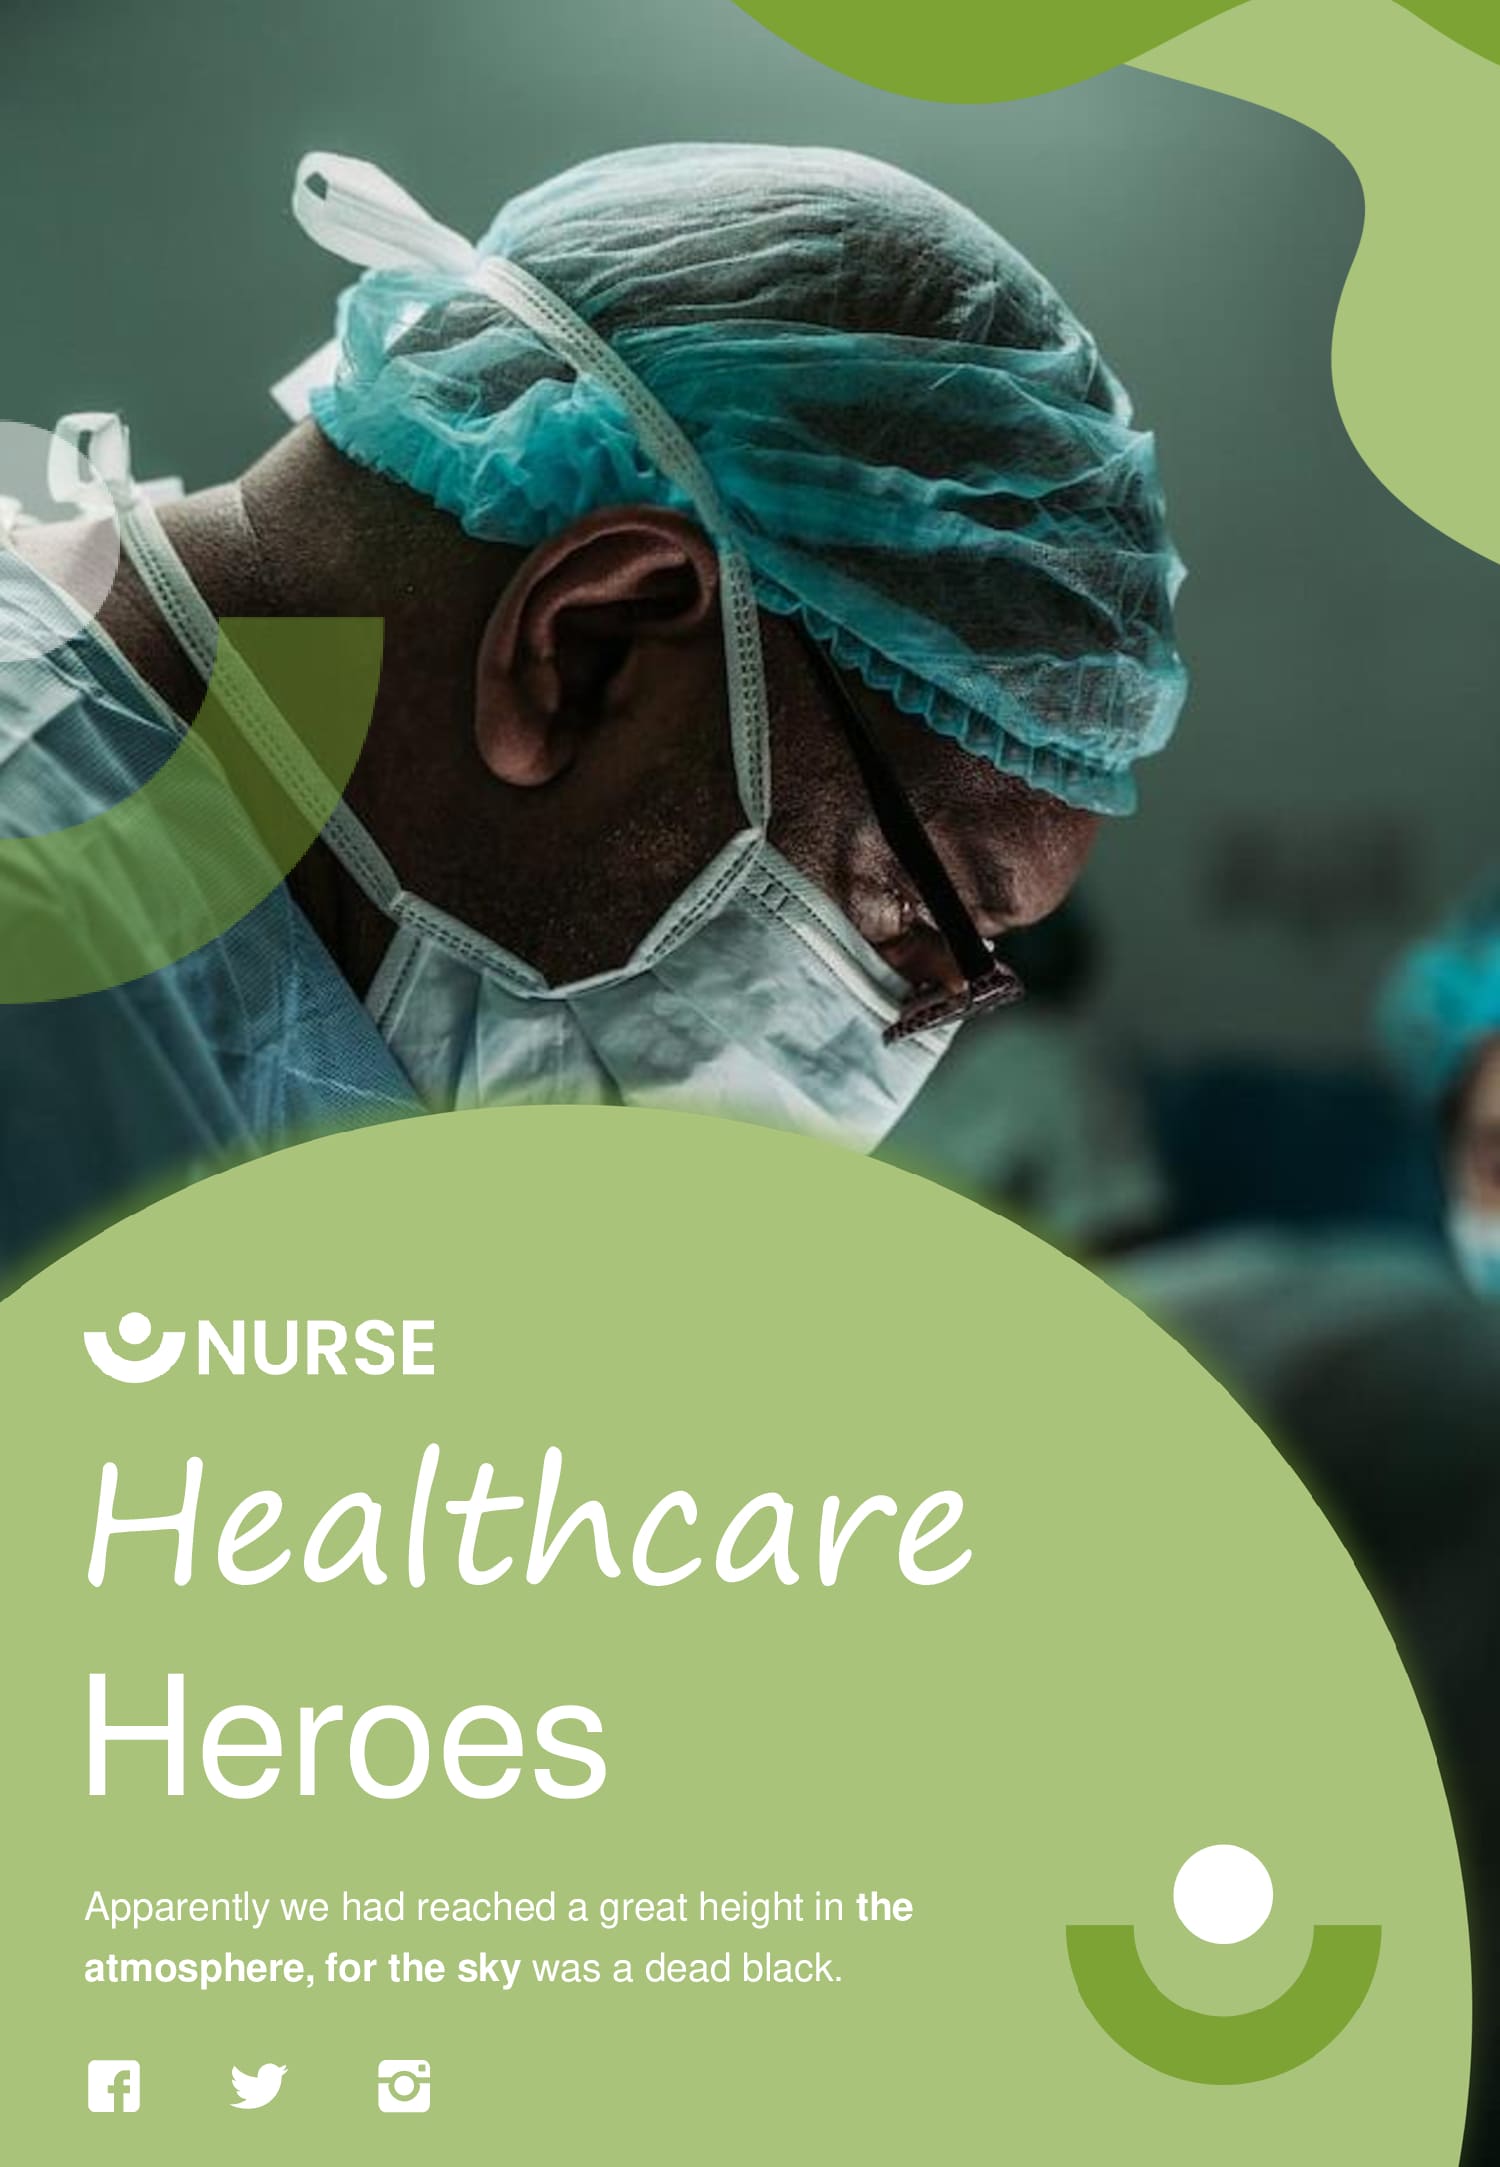 Medical workers are heroes.